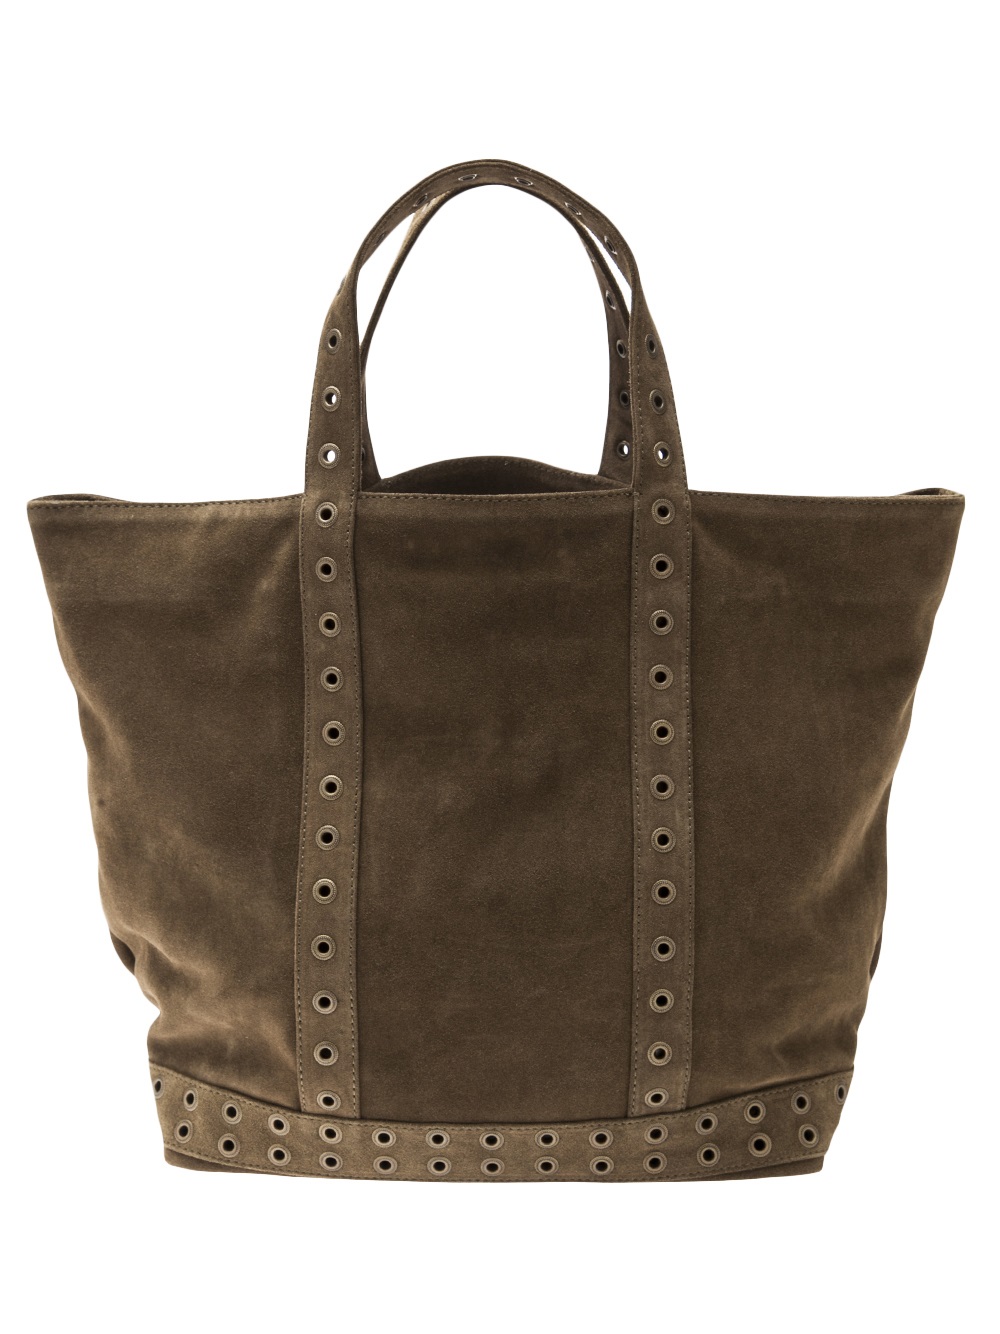 Lyst - Vanessa Bruno Leather Tote Bag in Brown